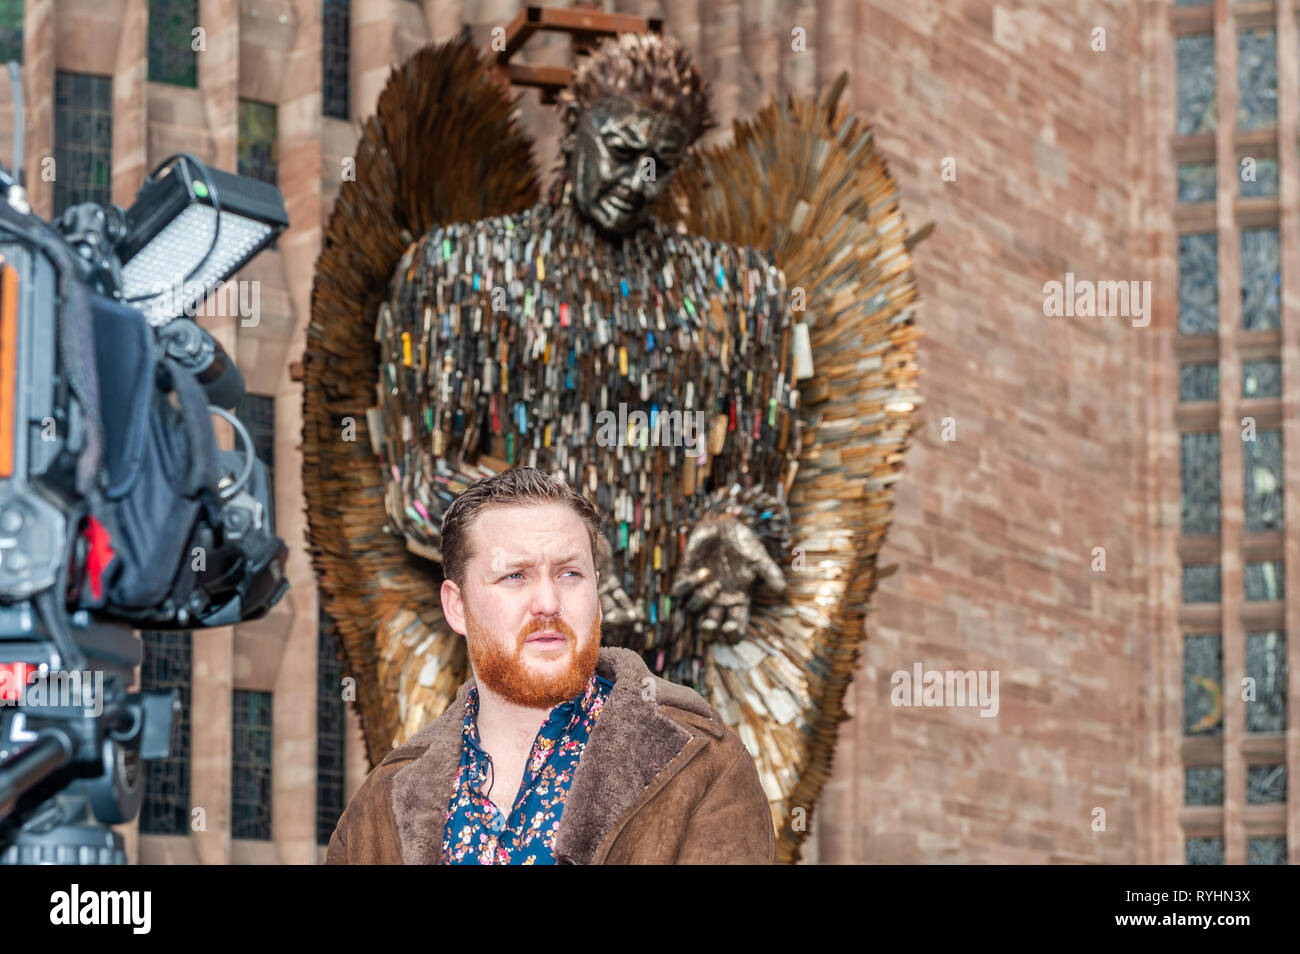 Coventry, West Midlands, UK. 14th March, 2019.  The Knife Angel, which is made up of 100,000 knives which were handed into police forces around the country, was erected outside Coventry Cathedral today. The Knife Angel is a 27 foot high sculpture composed of knives by the artist Alfie Bradley as a physical reminder of the effects of violence and aggression. It is in Coventry until 23rd April. Alfie Bradley, the sculptor responsible for the Knife Angel, was interviewed.  Credit: Andy Gibson/Alamy Live News. Stock Photo